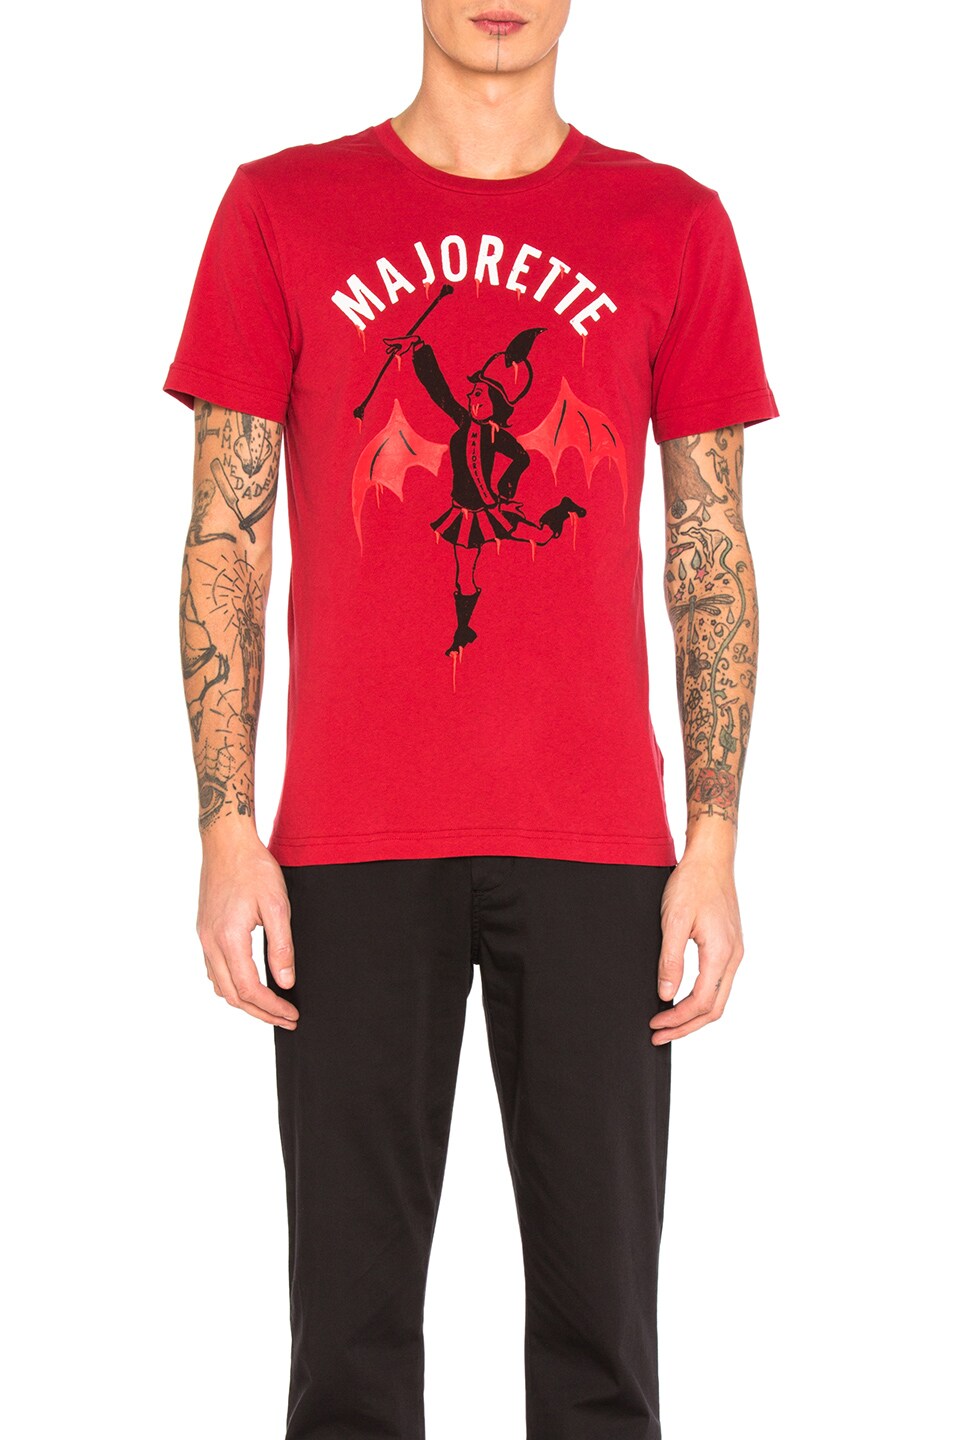 Image 1 of Coach Majorette Tee in Cardinal